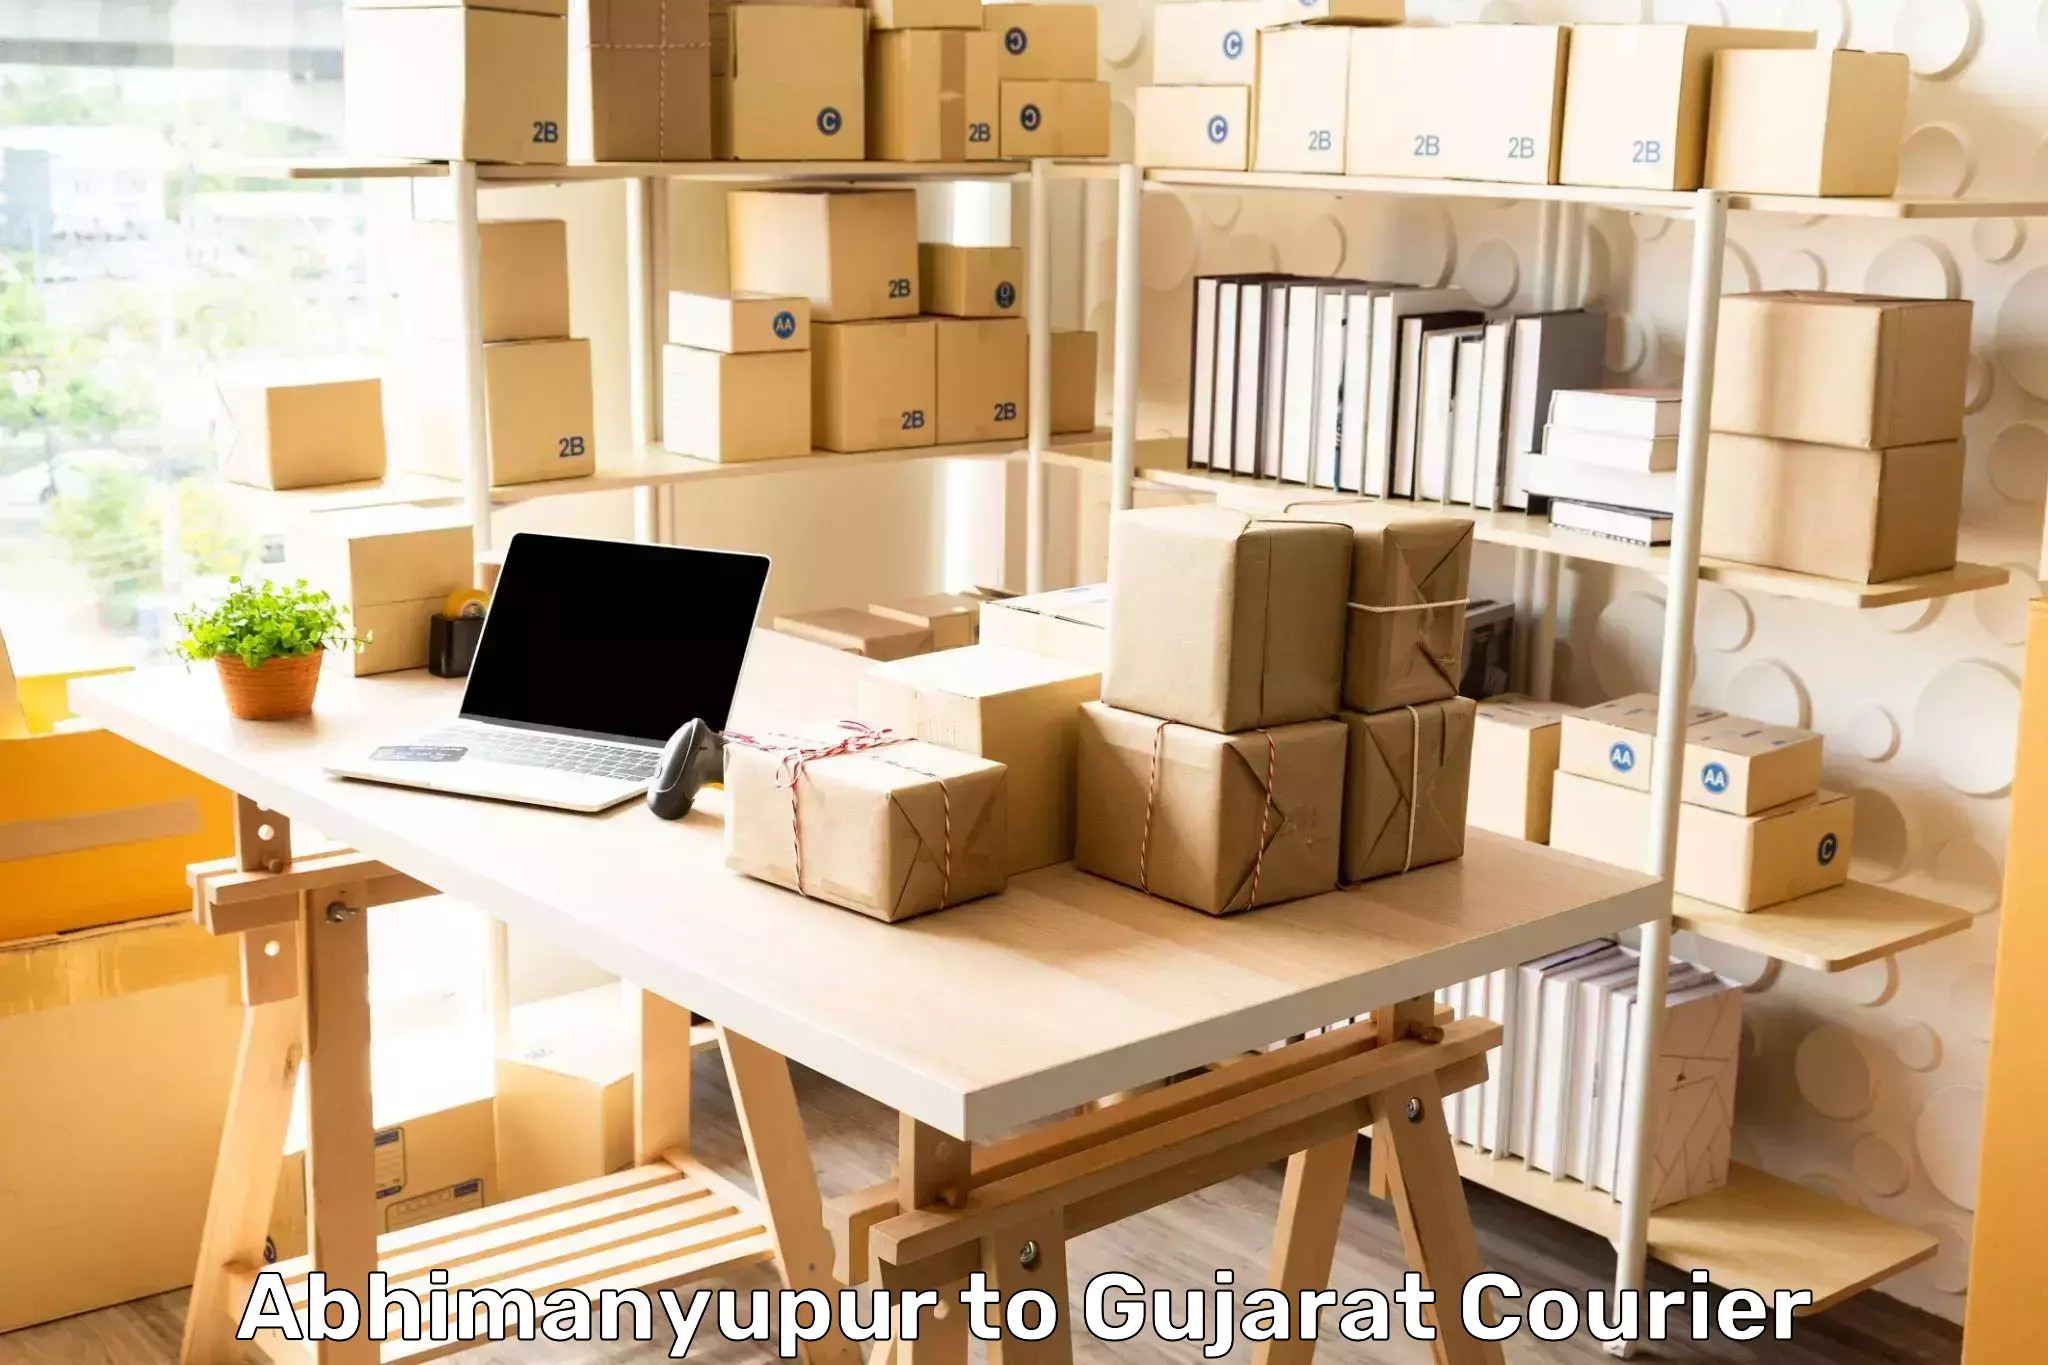 Quality courier services Abhimanyupur to Gujarat